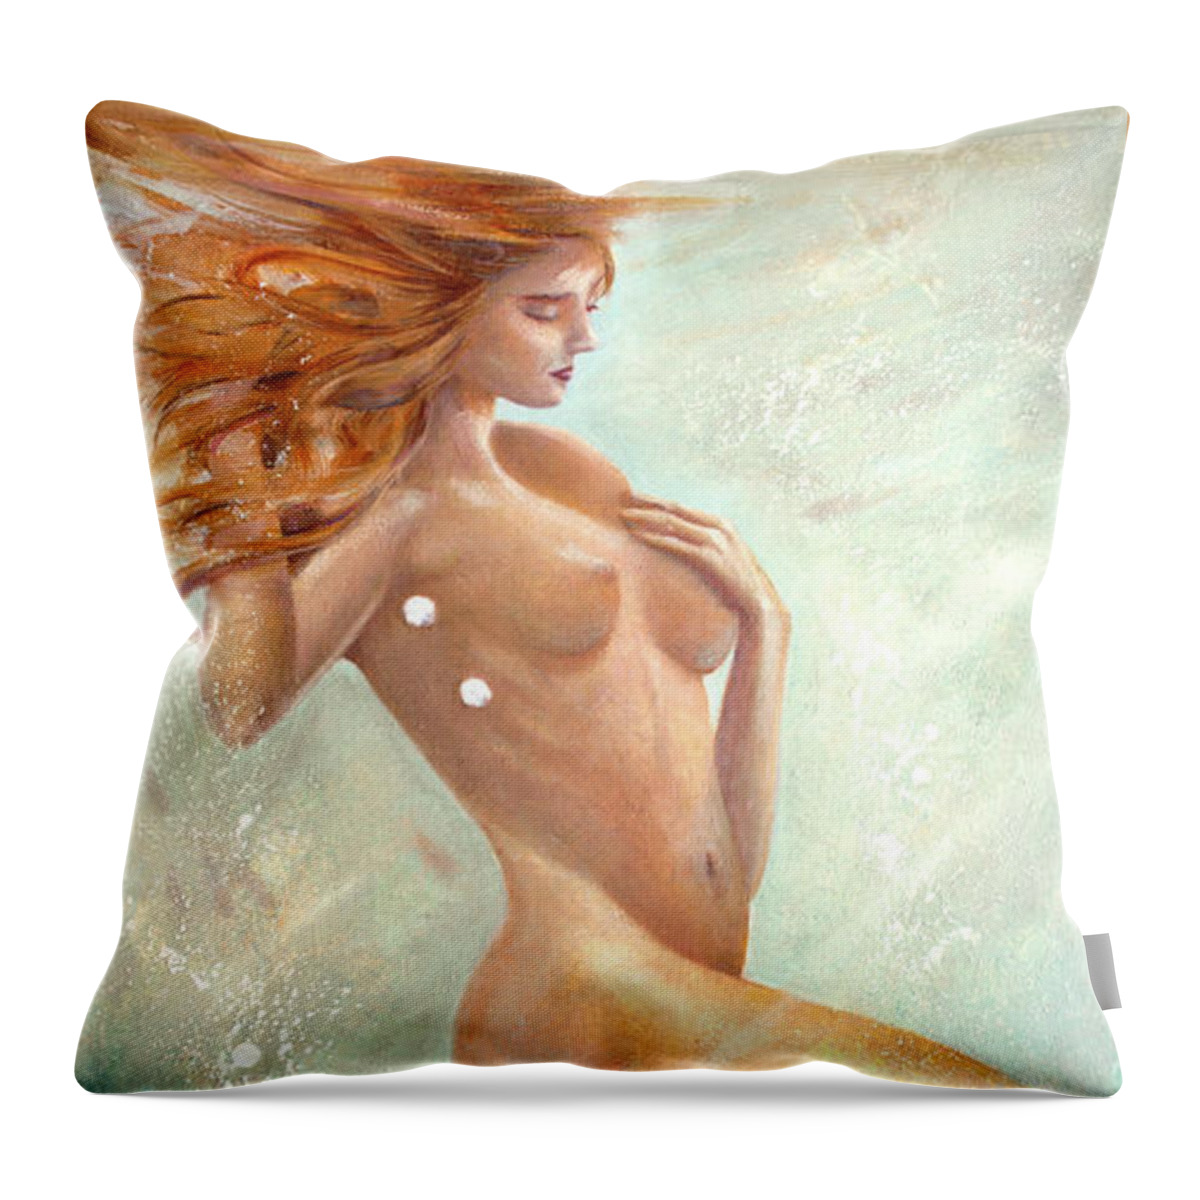 Nude Throw Pillow featuring the painting Mermaid Dream by Michael Rock